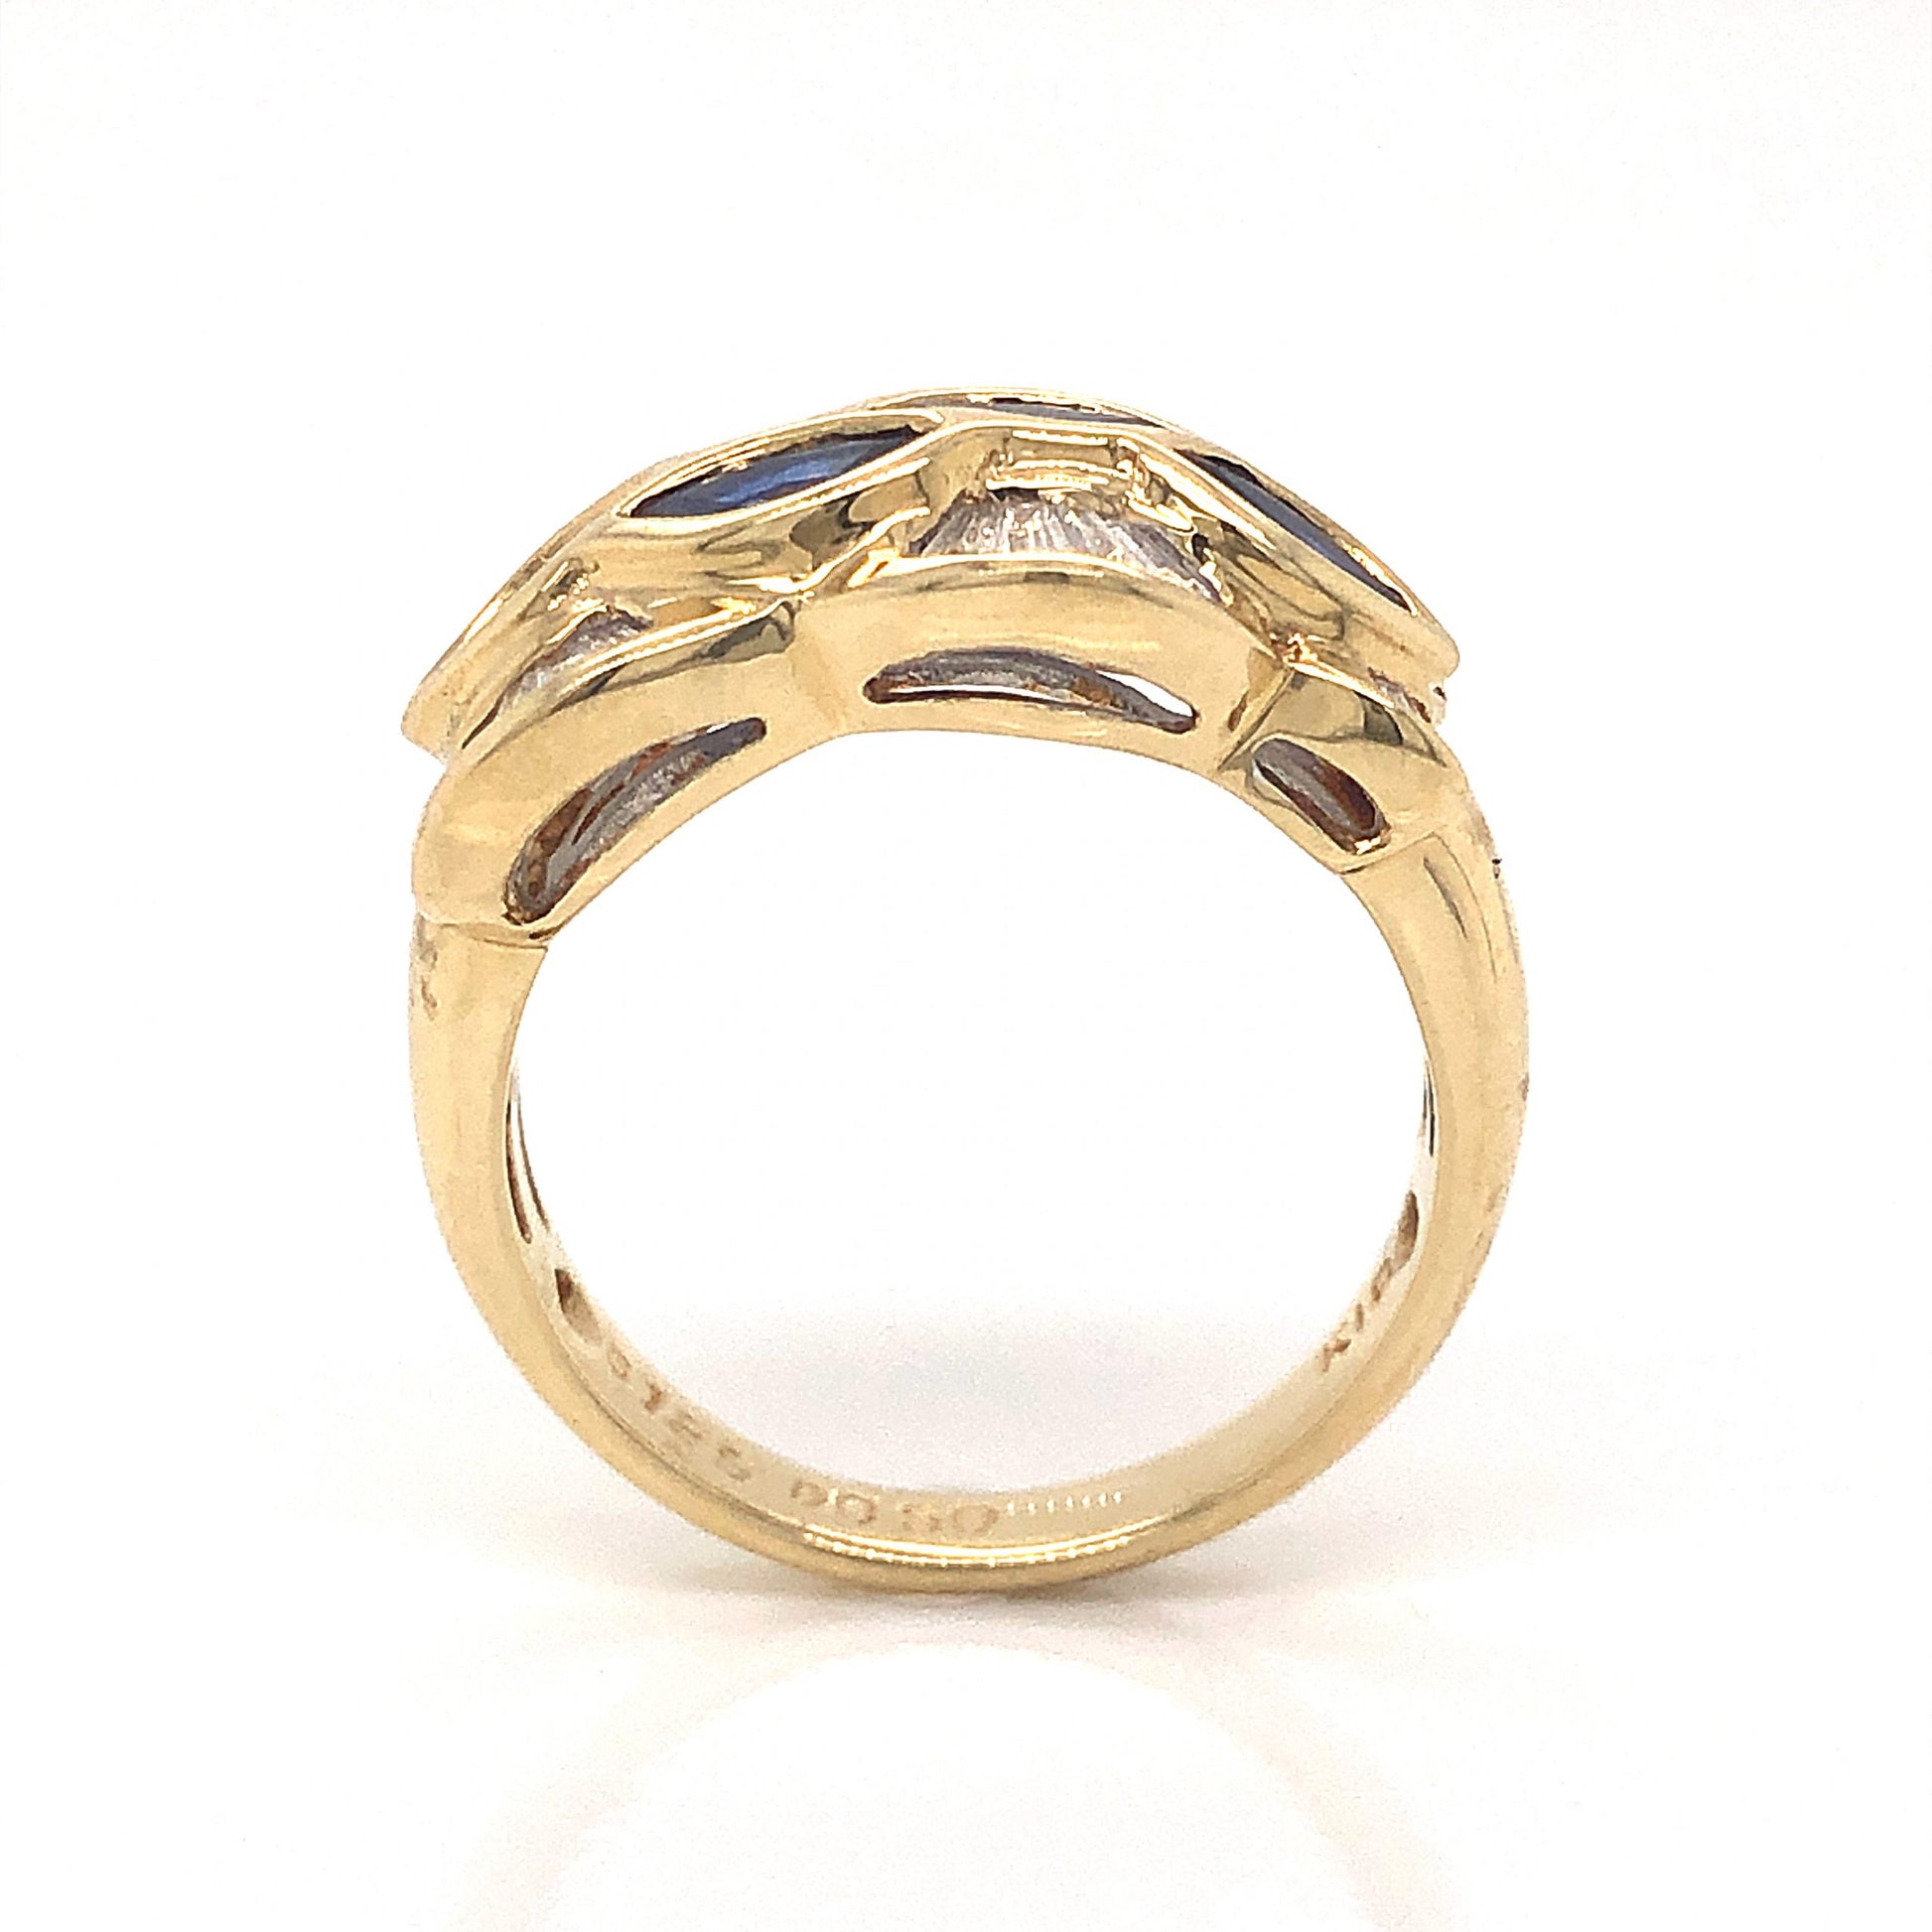 Sapphire & Diamond Cluster Cocktail Ring in 18k Yellow GoldComposition: 18 Karat Yellow Gold Ring Size: 6.5 Total Diamond Weight: .50ct Total Gram Weight: 6.2 g Inscription: S1.29 D0.50 K18
      